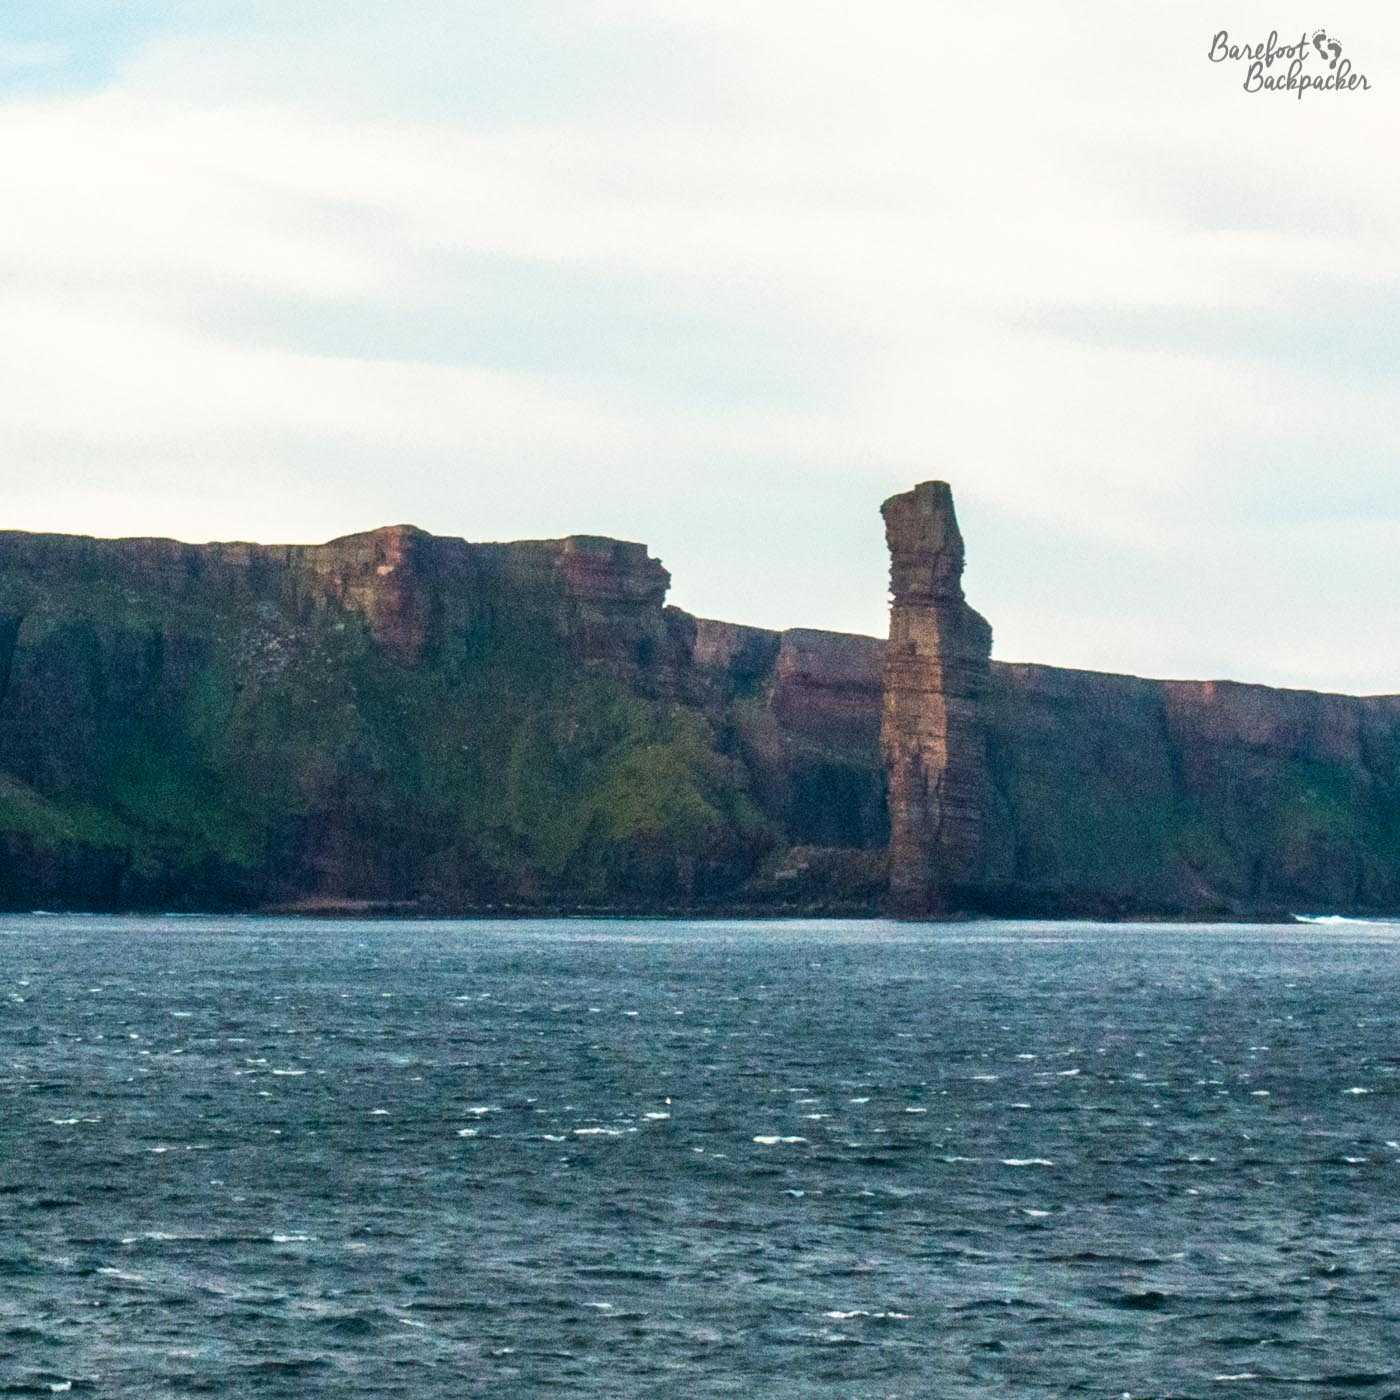 The Old Man Of Hoy, a rock stack off the coast of the island of Hoy, as seen from a passing ferry. It's taken from a distance, in the slightly less-than-optimal morning windy light, but you could make out its size (taller than the cliffs behind it) and its shape (a bit like a raised thumb).